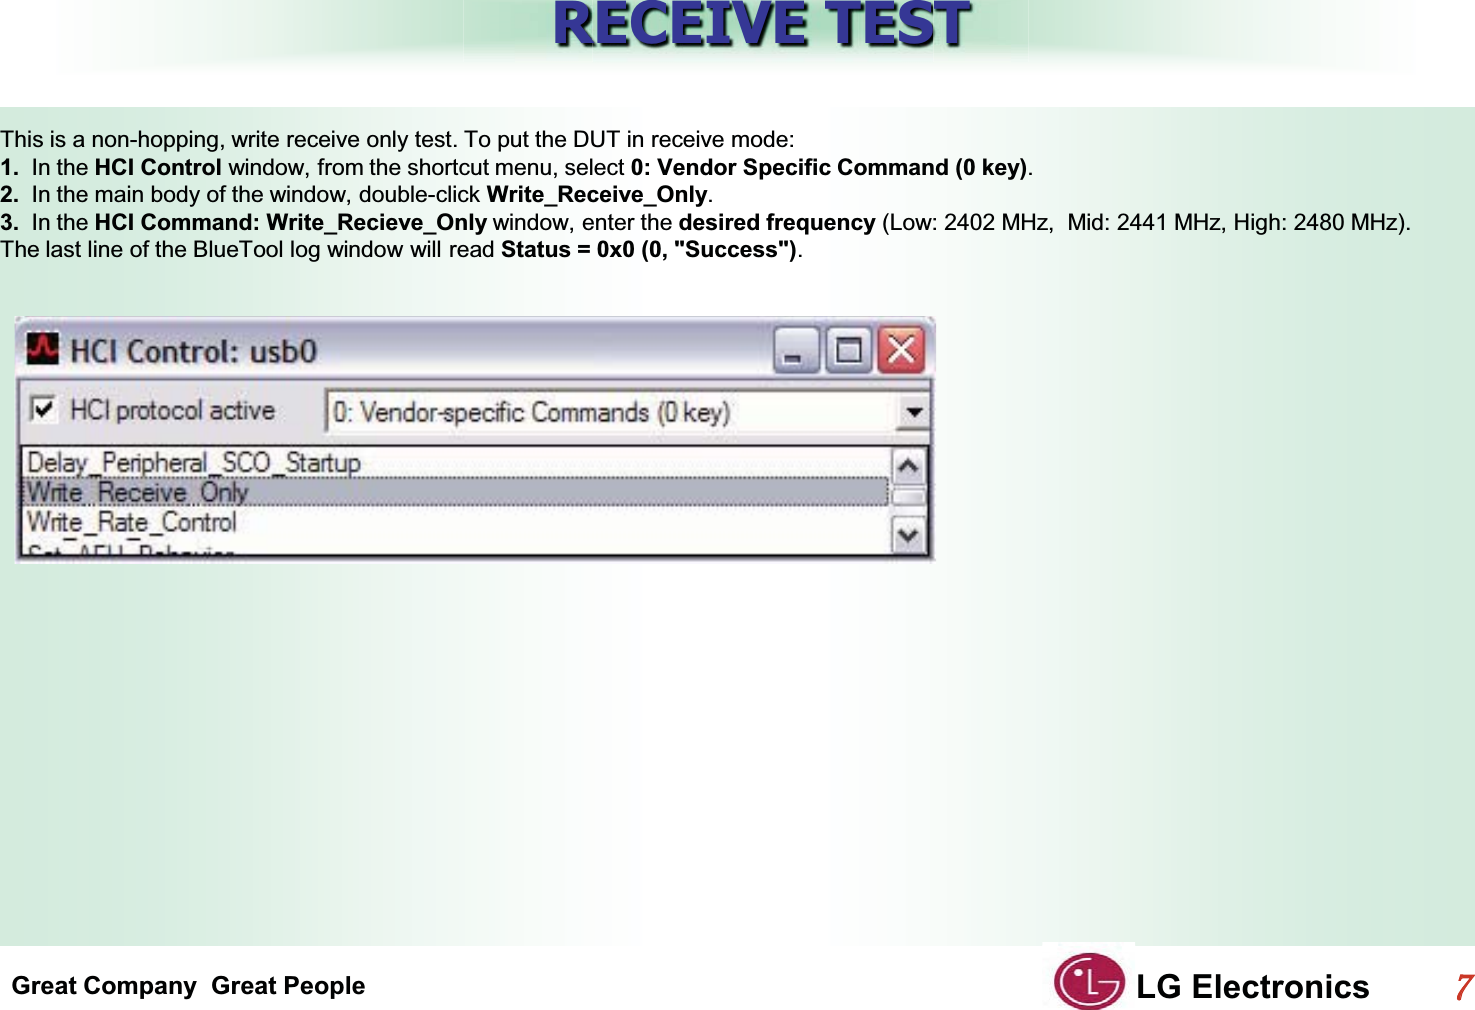 Great Company  Great People LG Electronics77  RECEIVE TESTThis is a non-hopping, write receive only test. To put the DUT in receive mode:G1.  In the HCI Control window, from the shortcut menu, select 0: Vendor Specific Command (0 key).G2.  In the main body of the window, double-click Write_Receive_Only.G3.  In the HCI Command: Write_Recieve_Only window, enter the desired frequency (Low: 2402 MHz,  Mid: 2441 MHz, High: 2480 MHz).GThe last line of the BlueTool log window will read Status = 0x0 (0, &quot;Success&quot;).GG